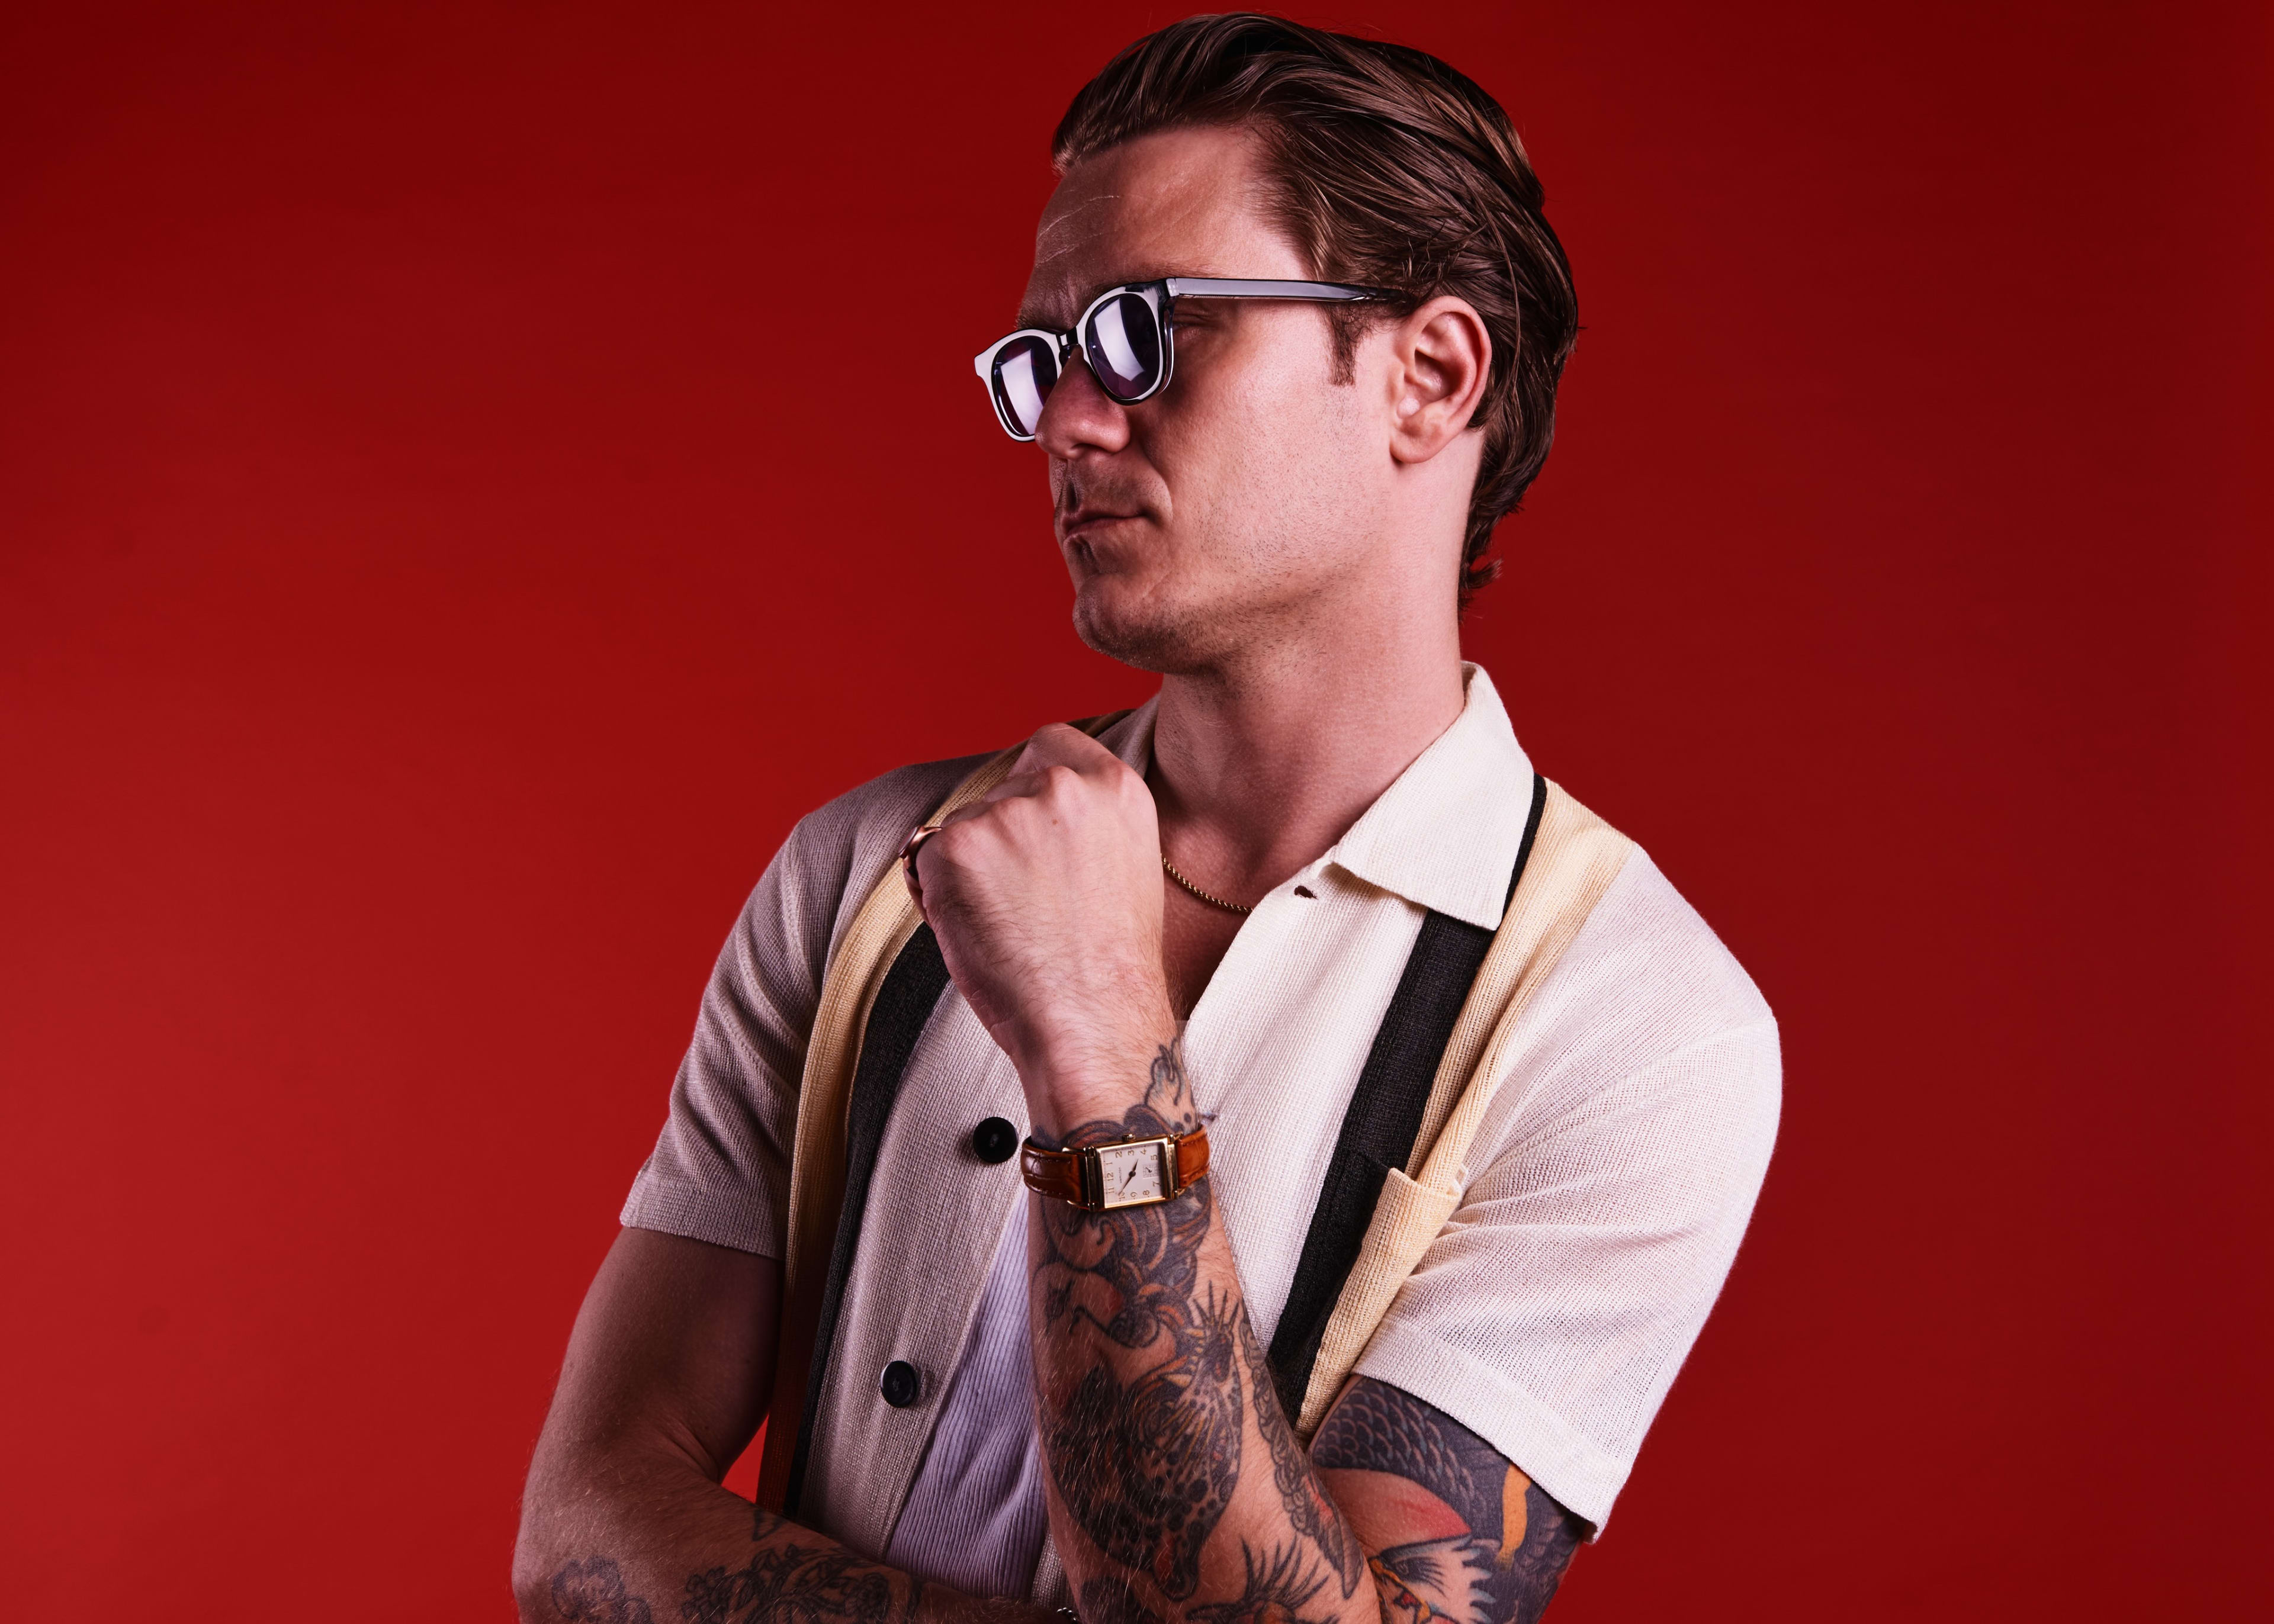 A man with a tattoo on his arm posing for a 1950s fashion photoshoot.